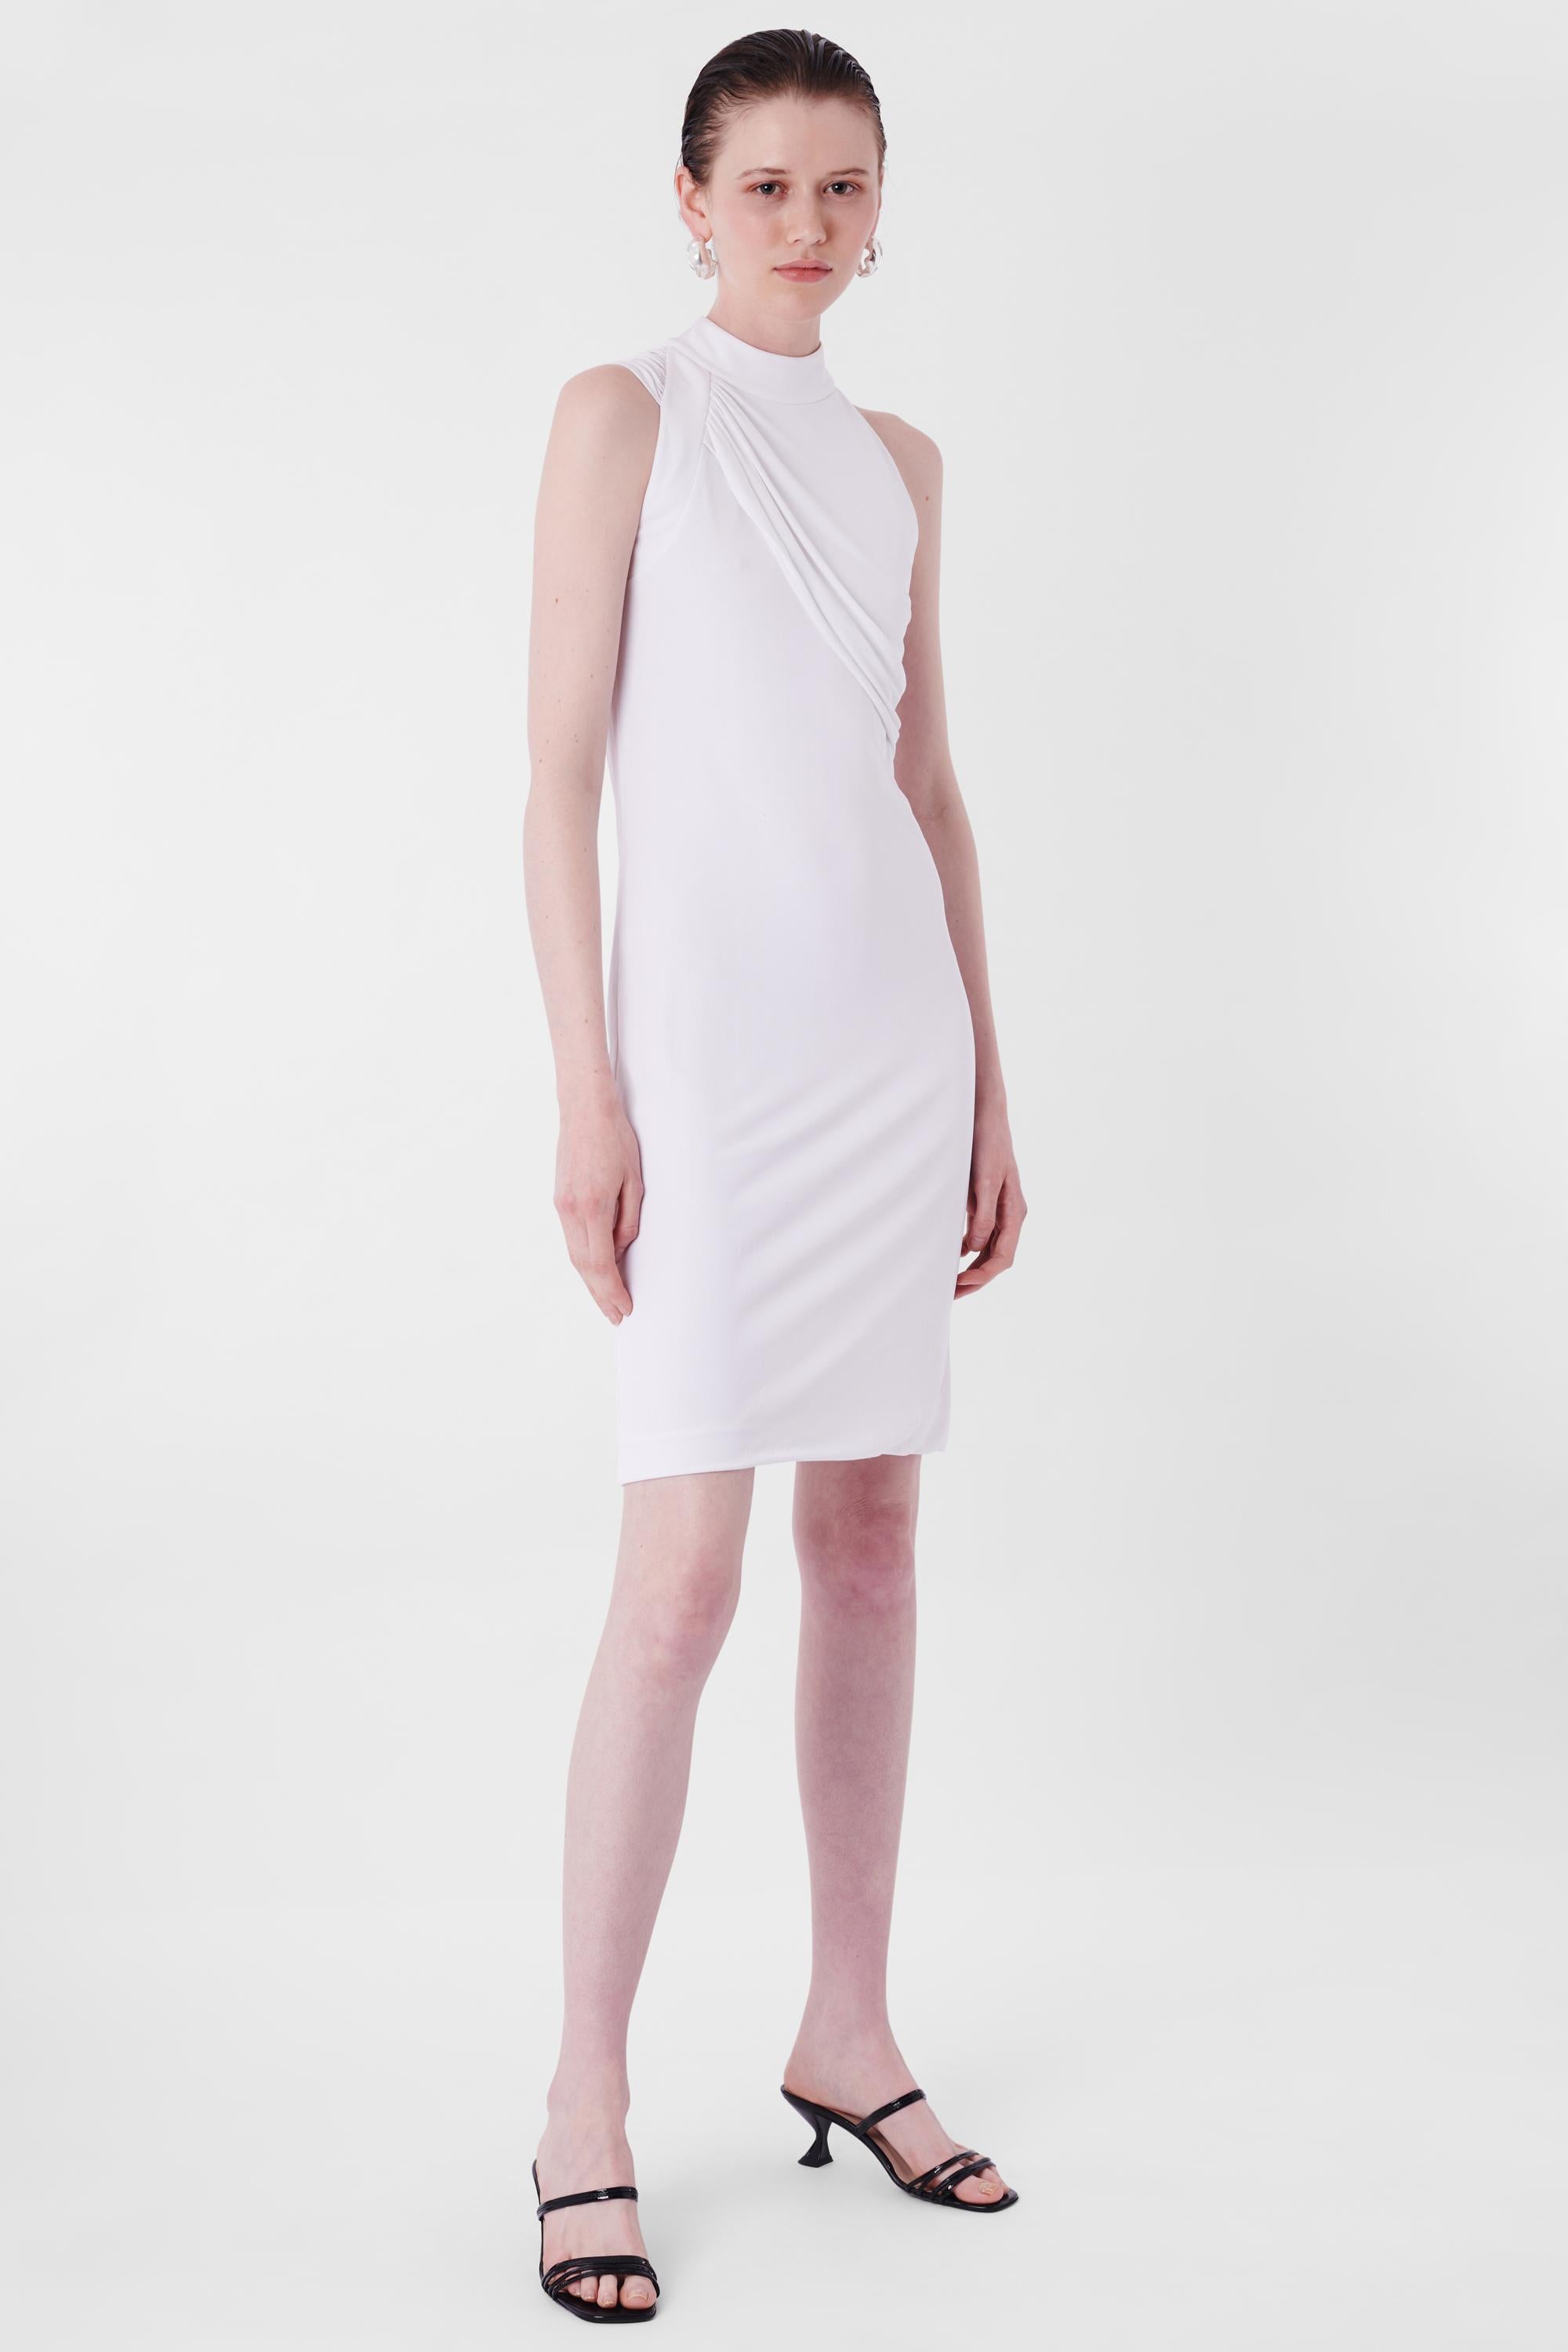 Gucci S/S 2012 White Silk Draped Dress In Good Condition For Sale In London, GB